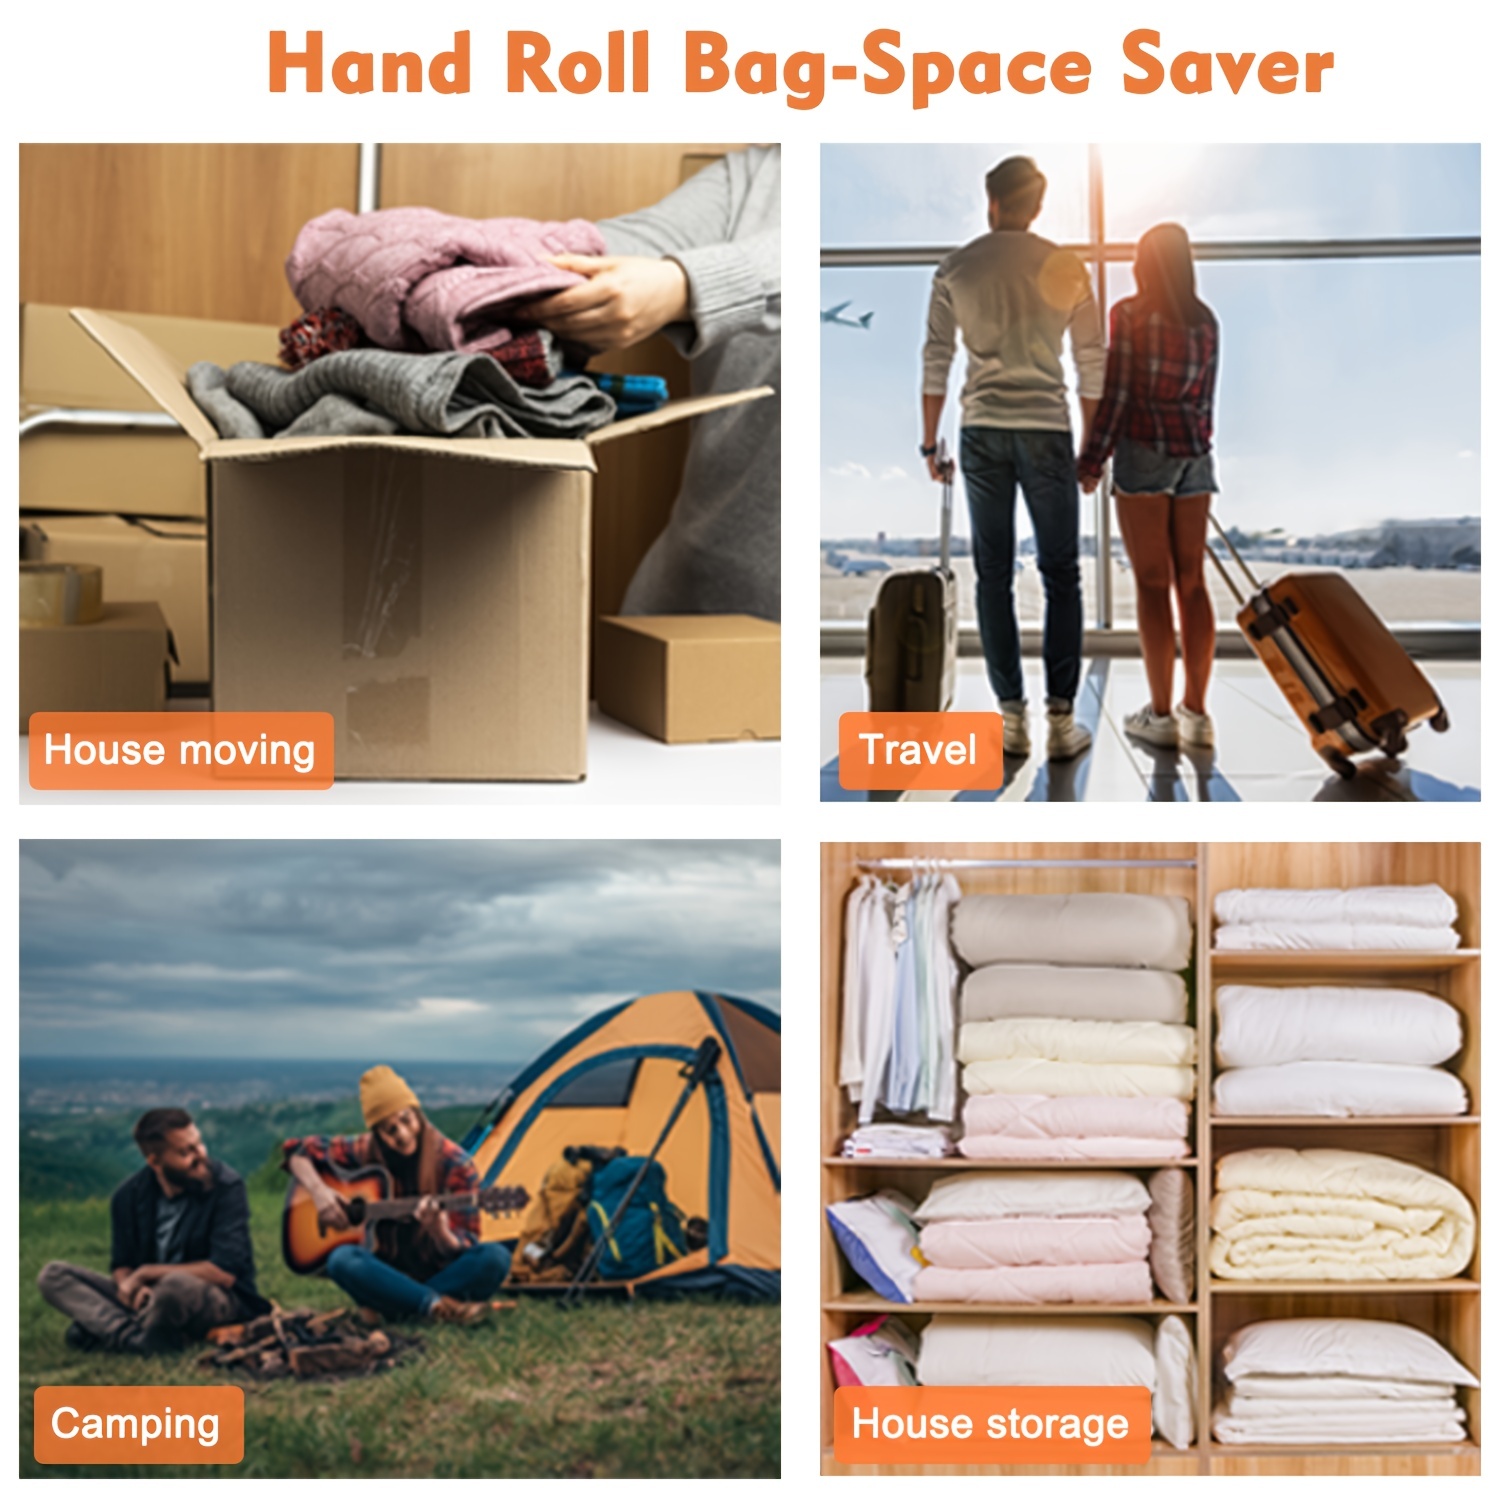 Compression Bags For Travel, Travel Accessories, Space Saver Bags